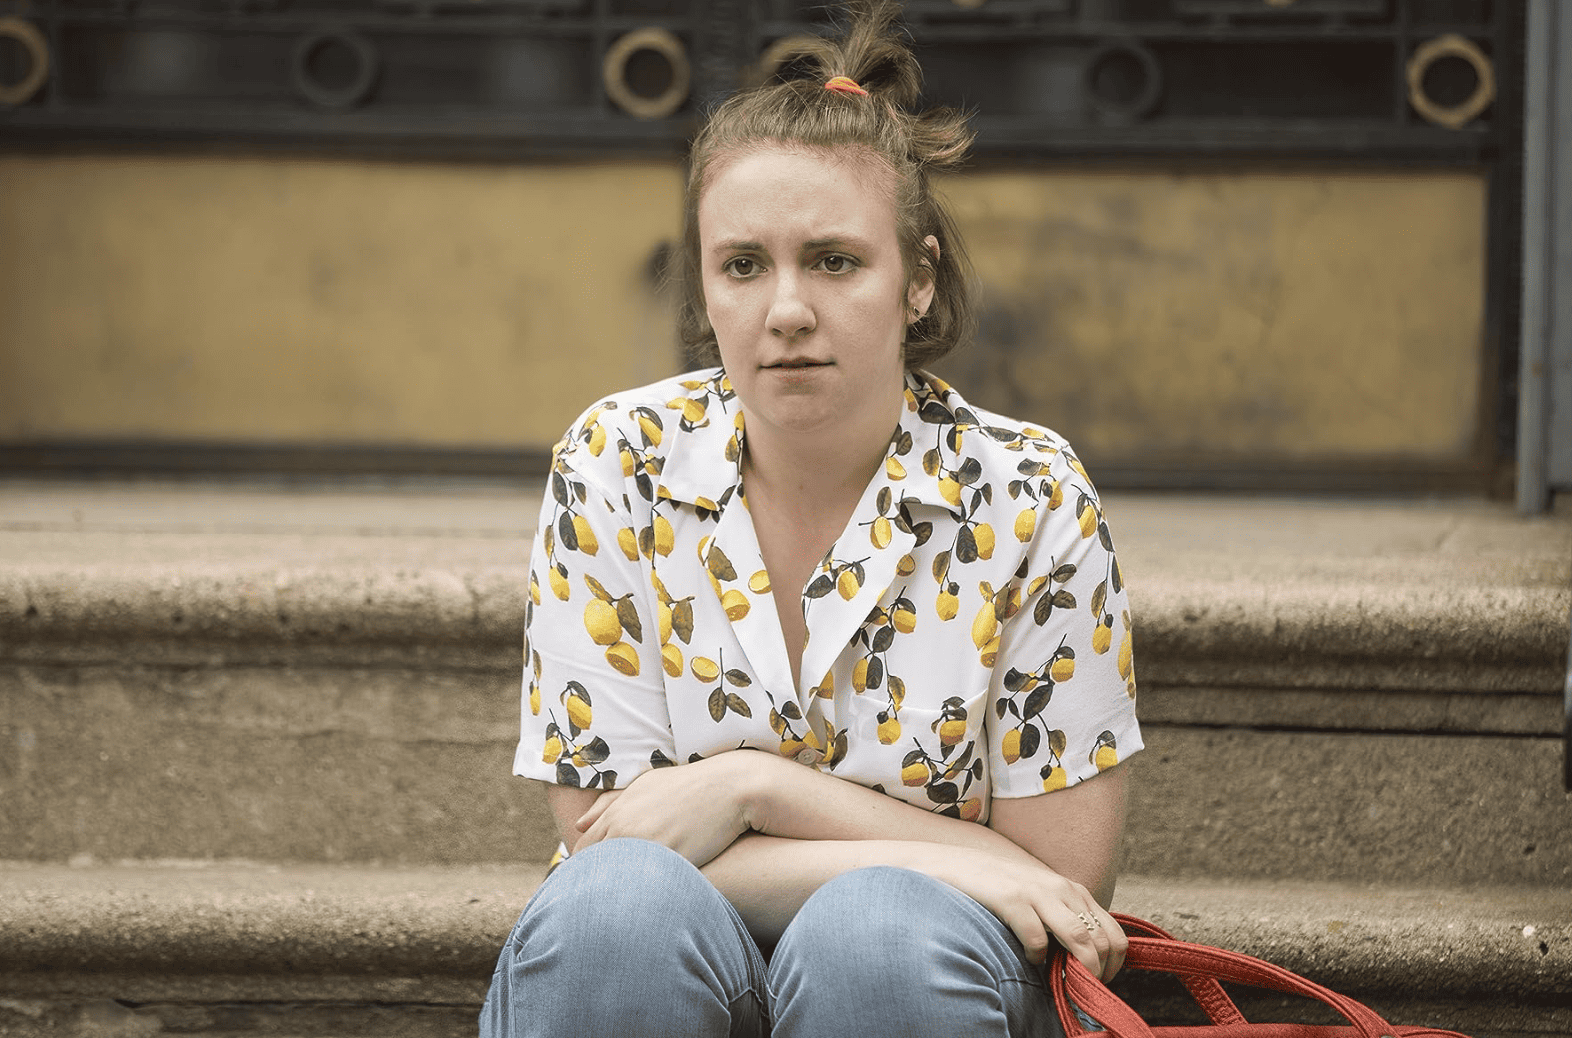 A visibly worried Lena Dunham sitting on some front steps with her legs crossed over her knees in this image from Apatow Productions